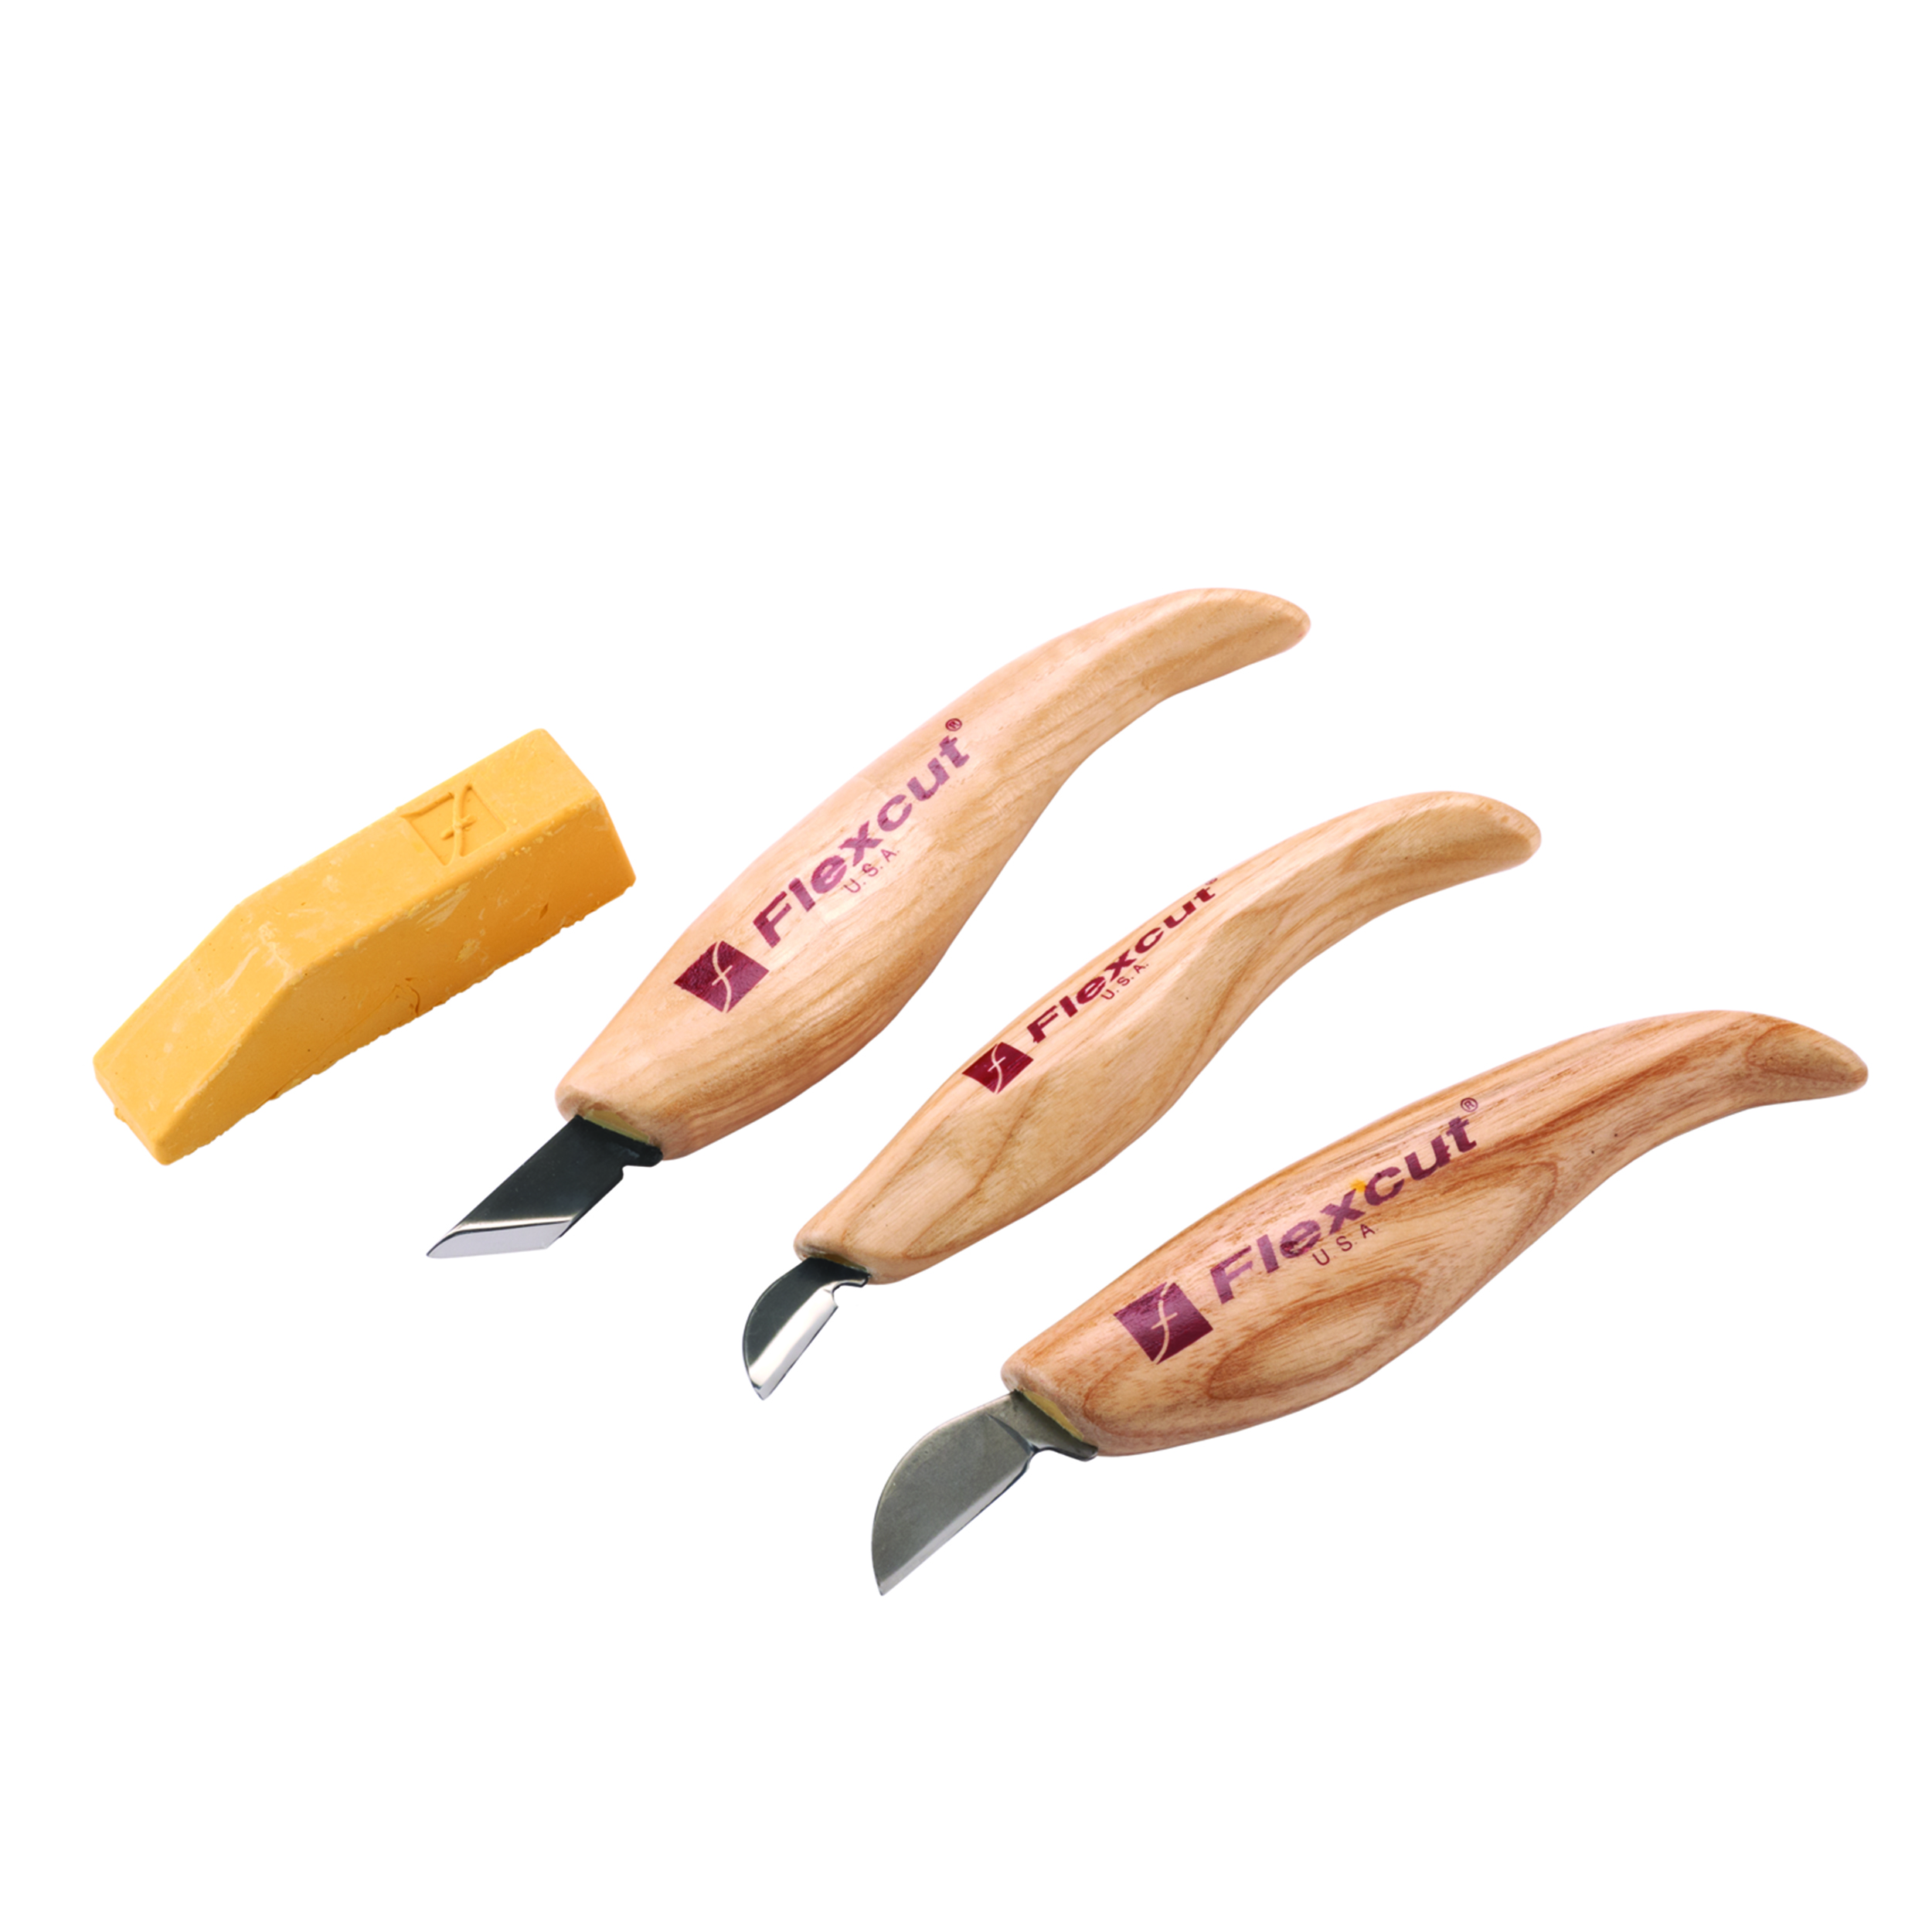 Chip Carving Tool Set, 3 Piece With Sharpening Compound